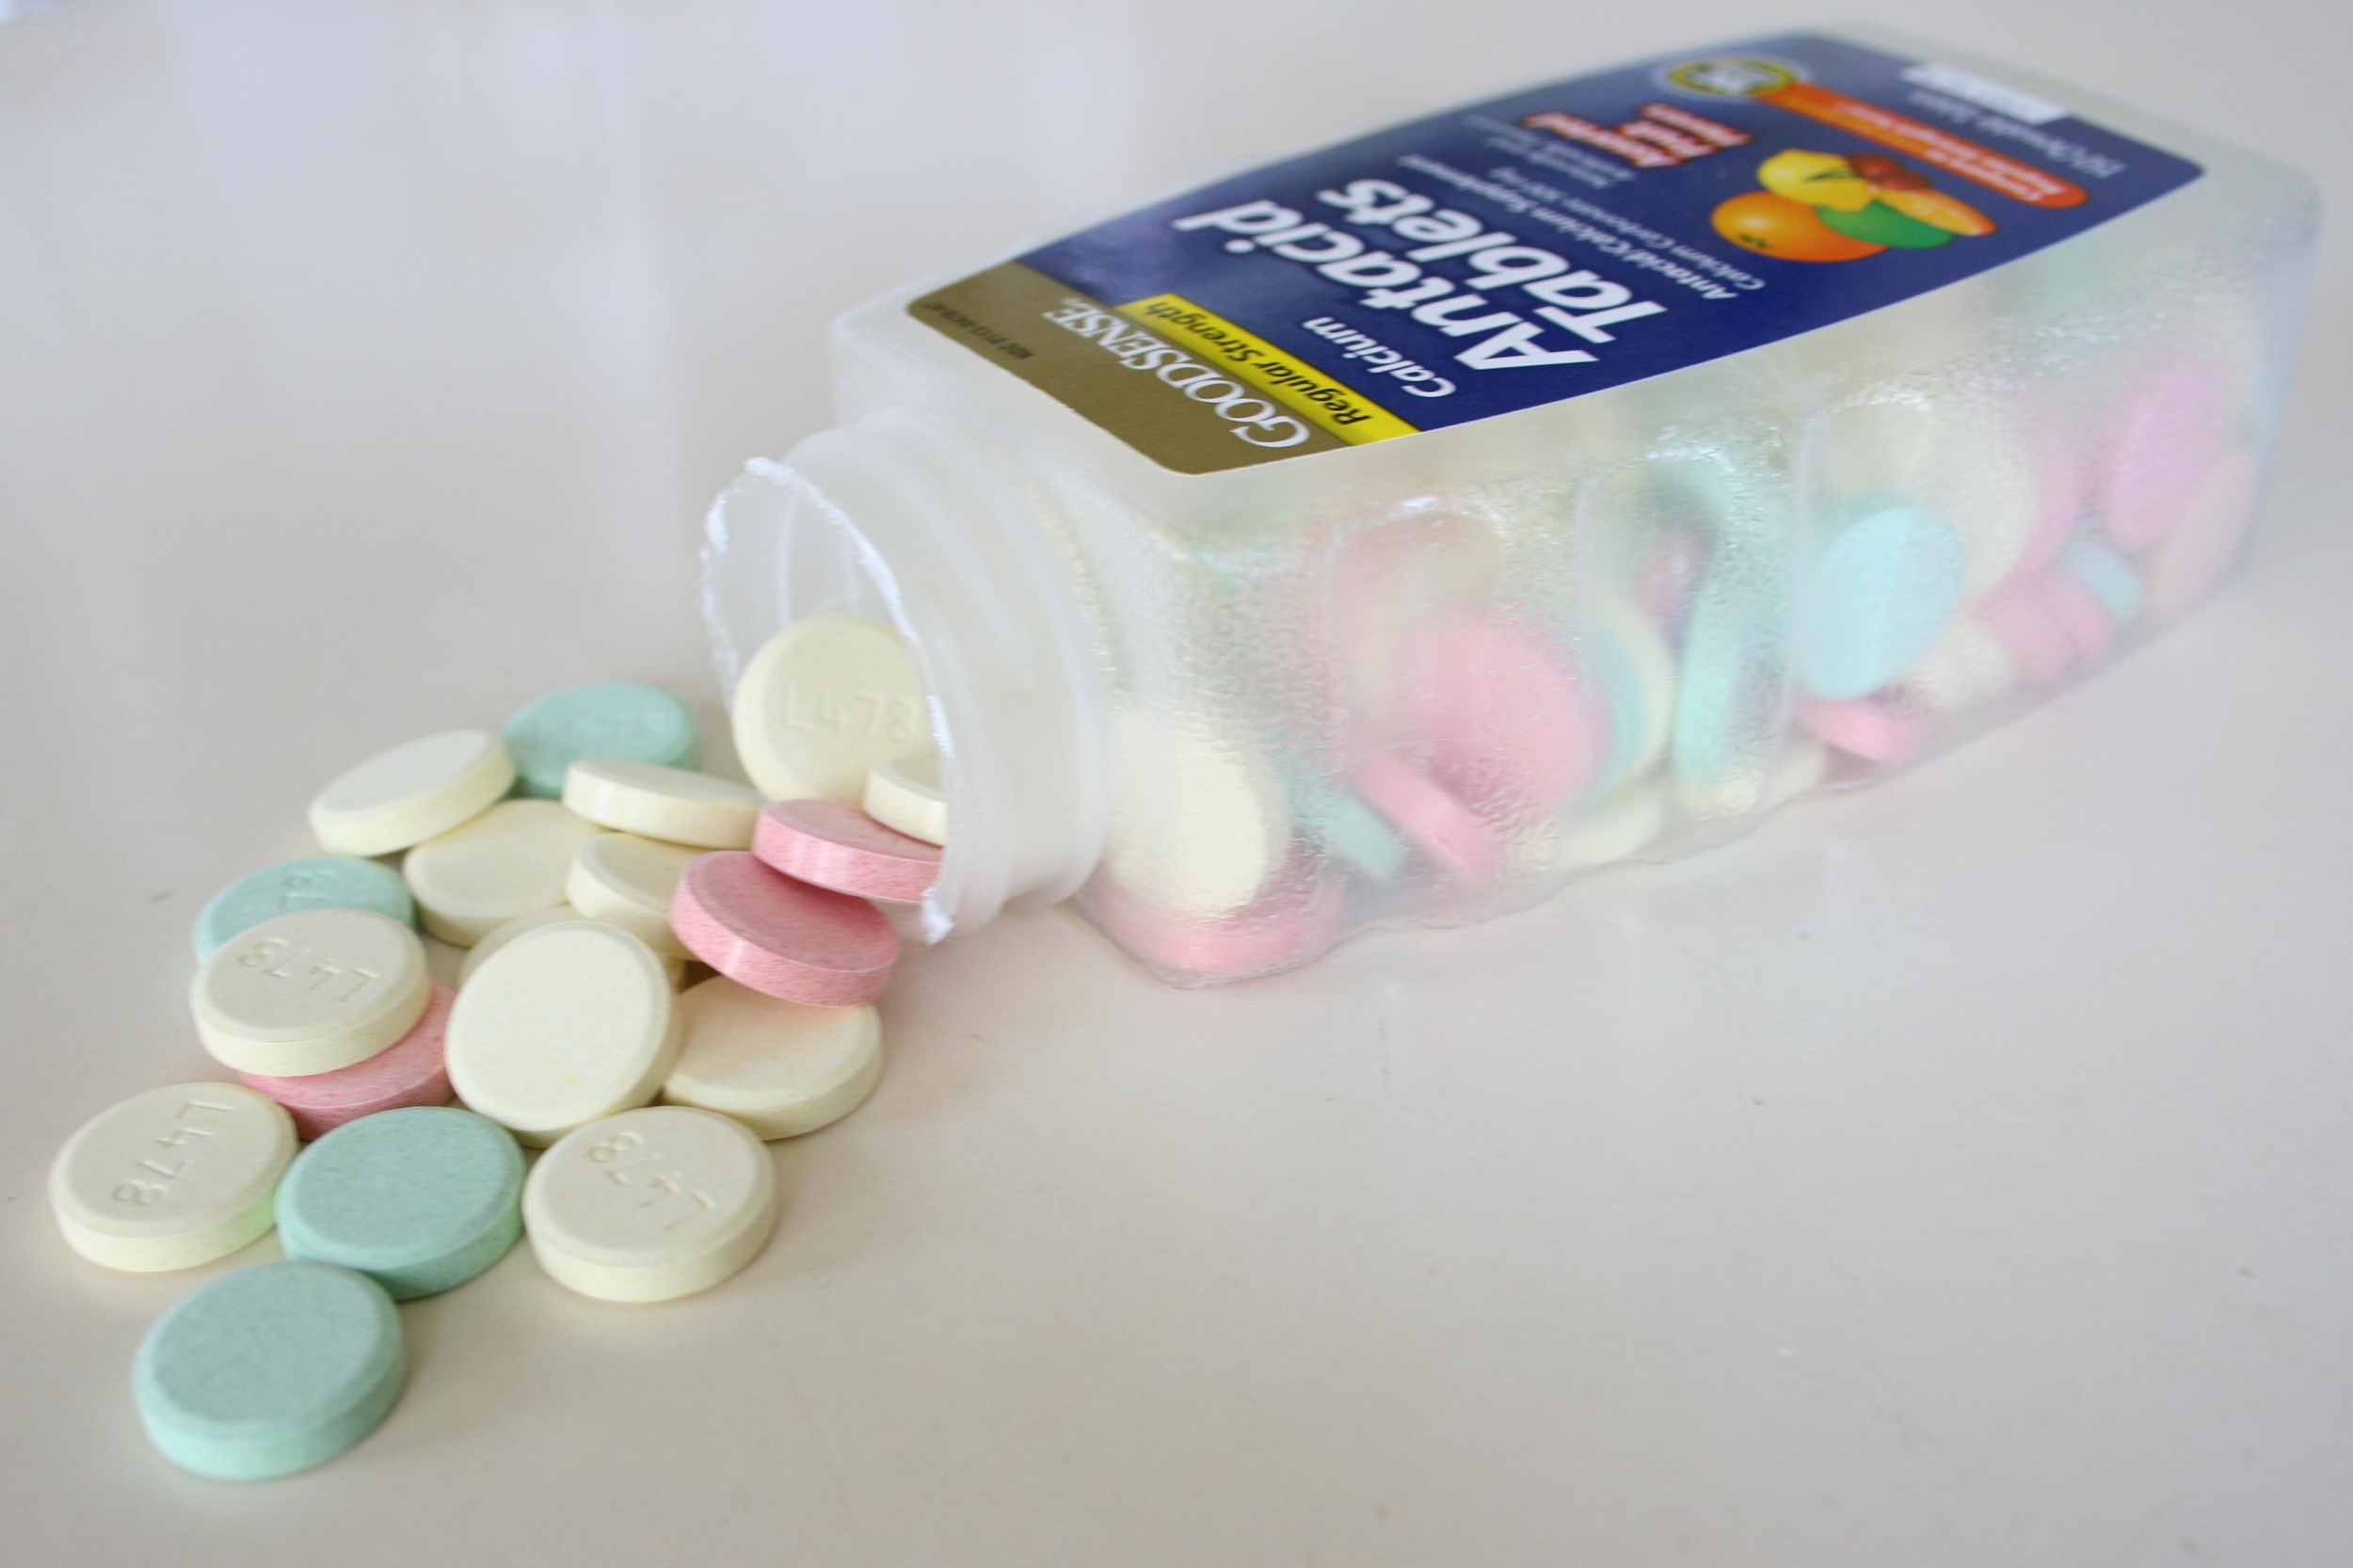 An Antacid tablets bottle resting on side, with contents spilled out.